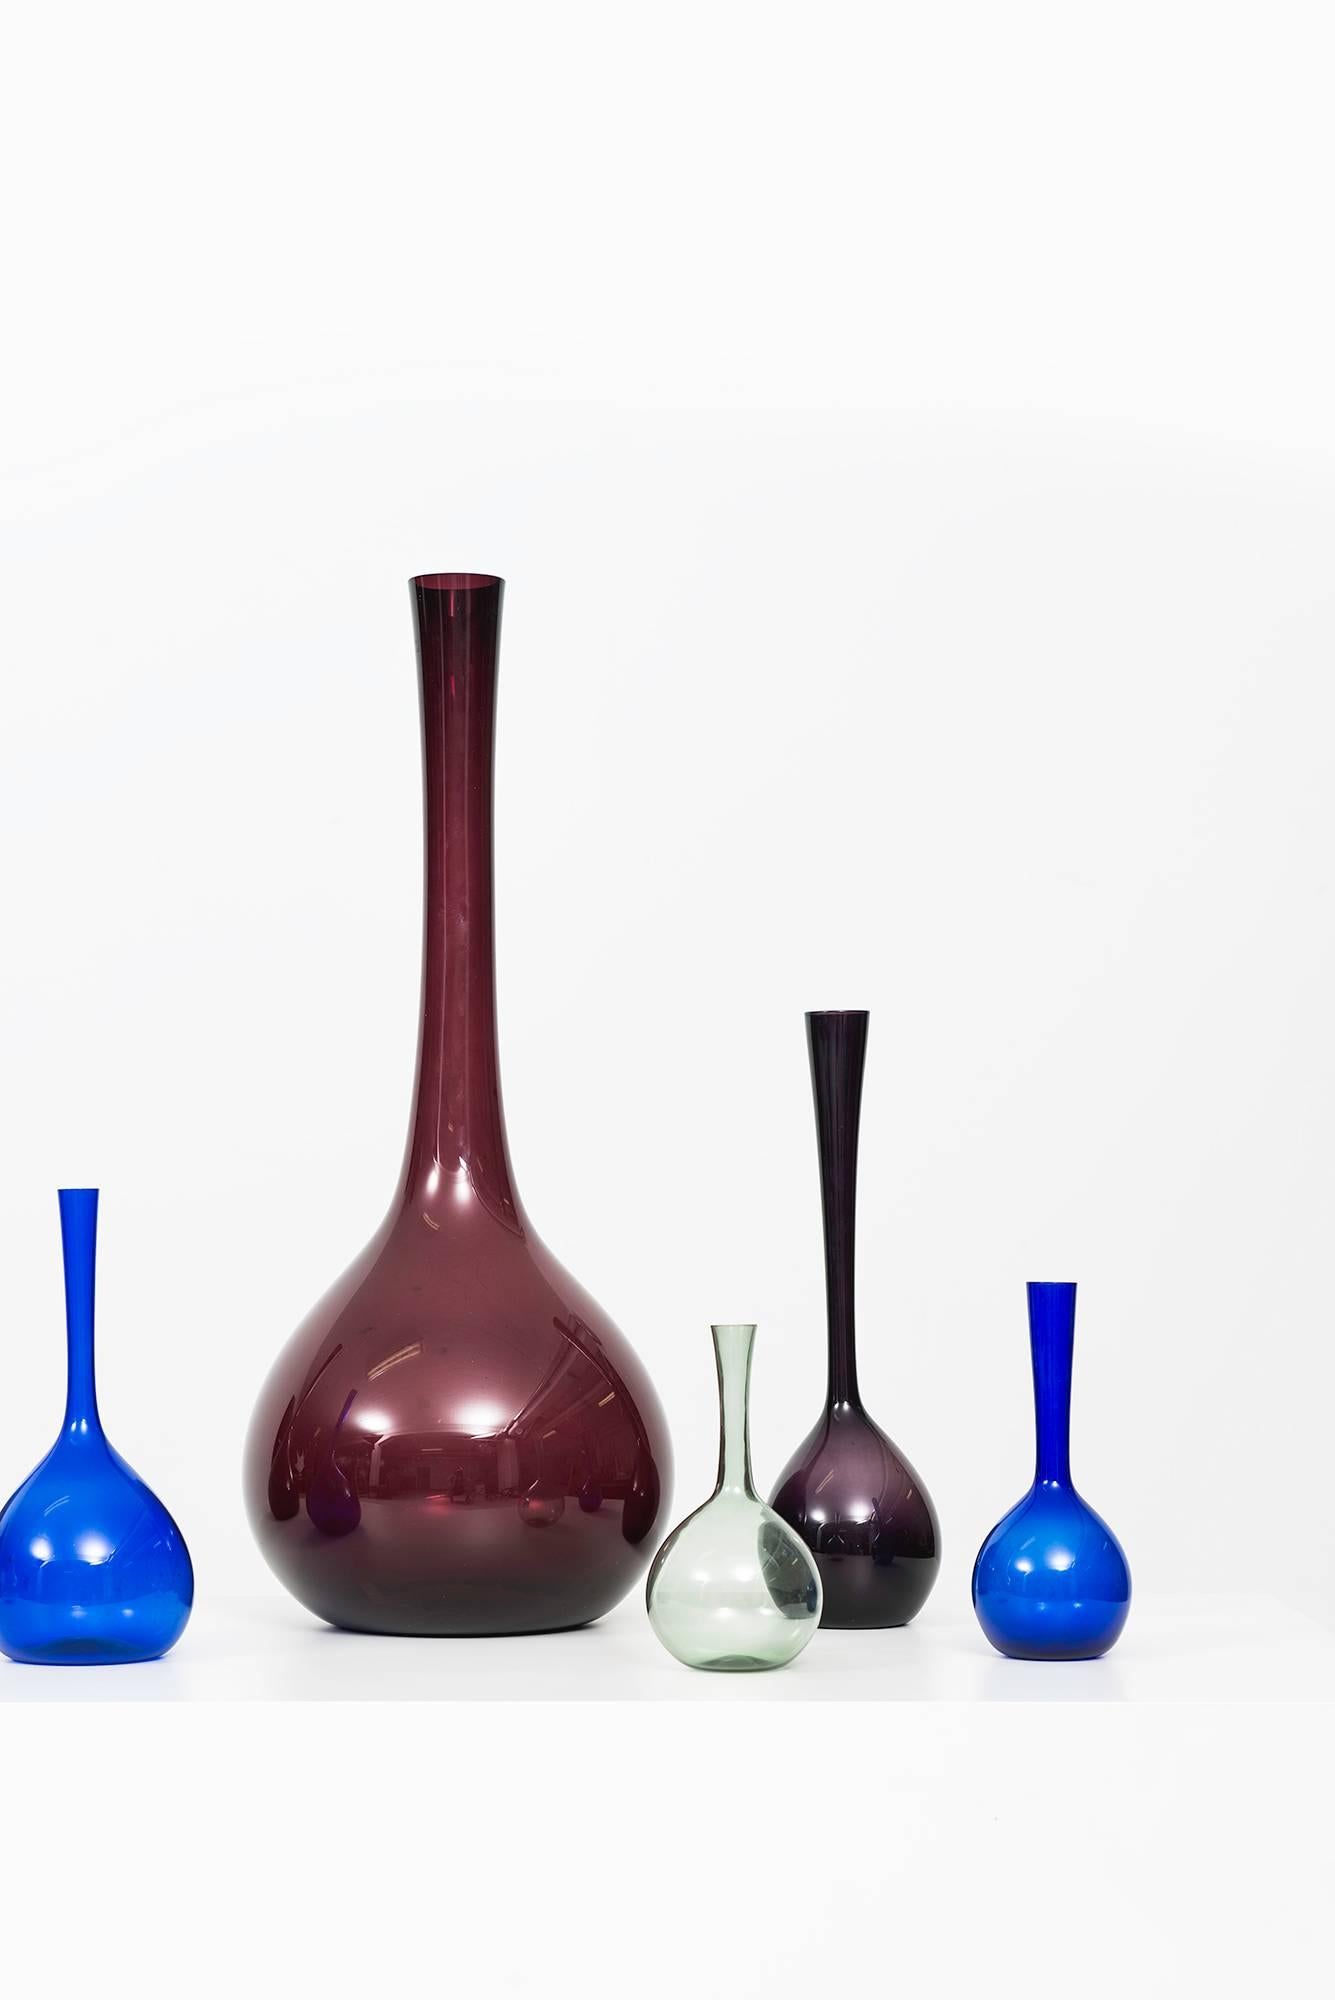 A set of seven glass vases designed by Arthur Percy. Produced by Gullaskruf in Sweden.